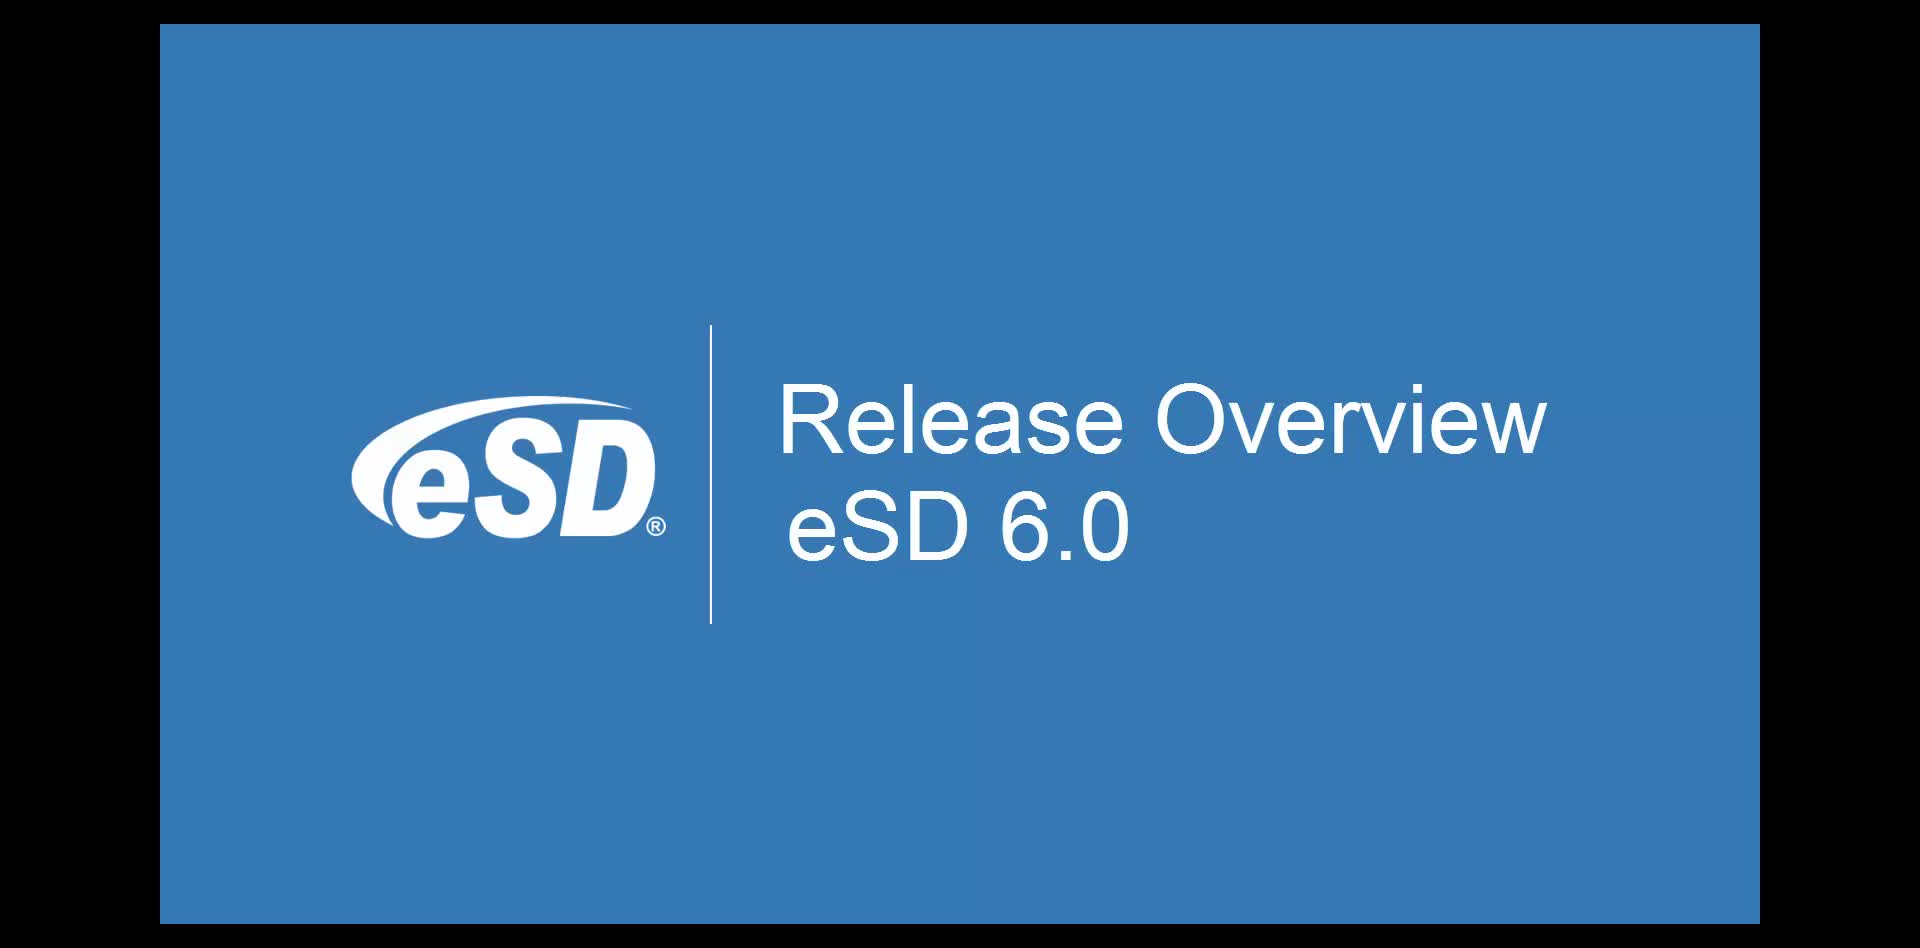 eSD 6.0 Release Overview